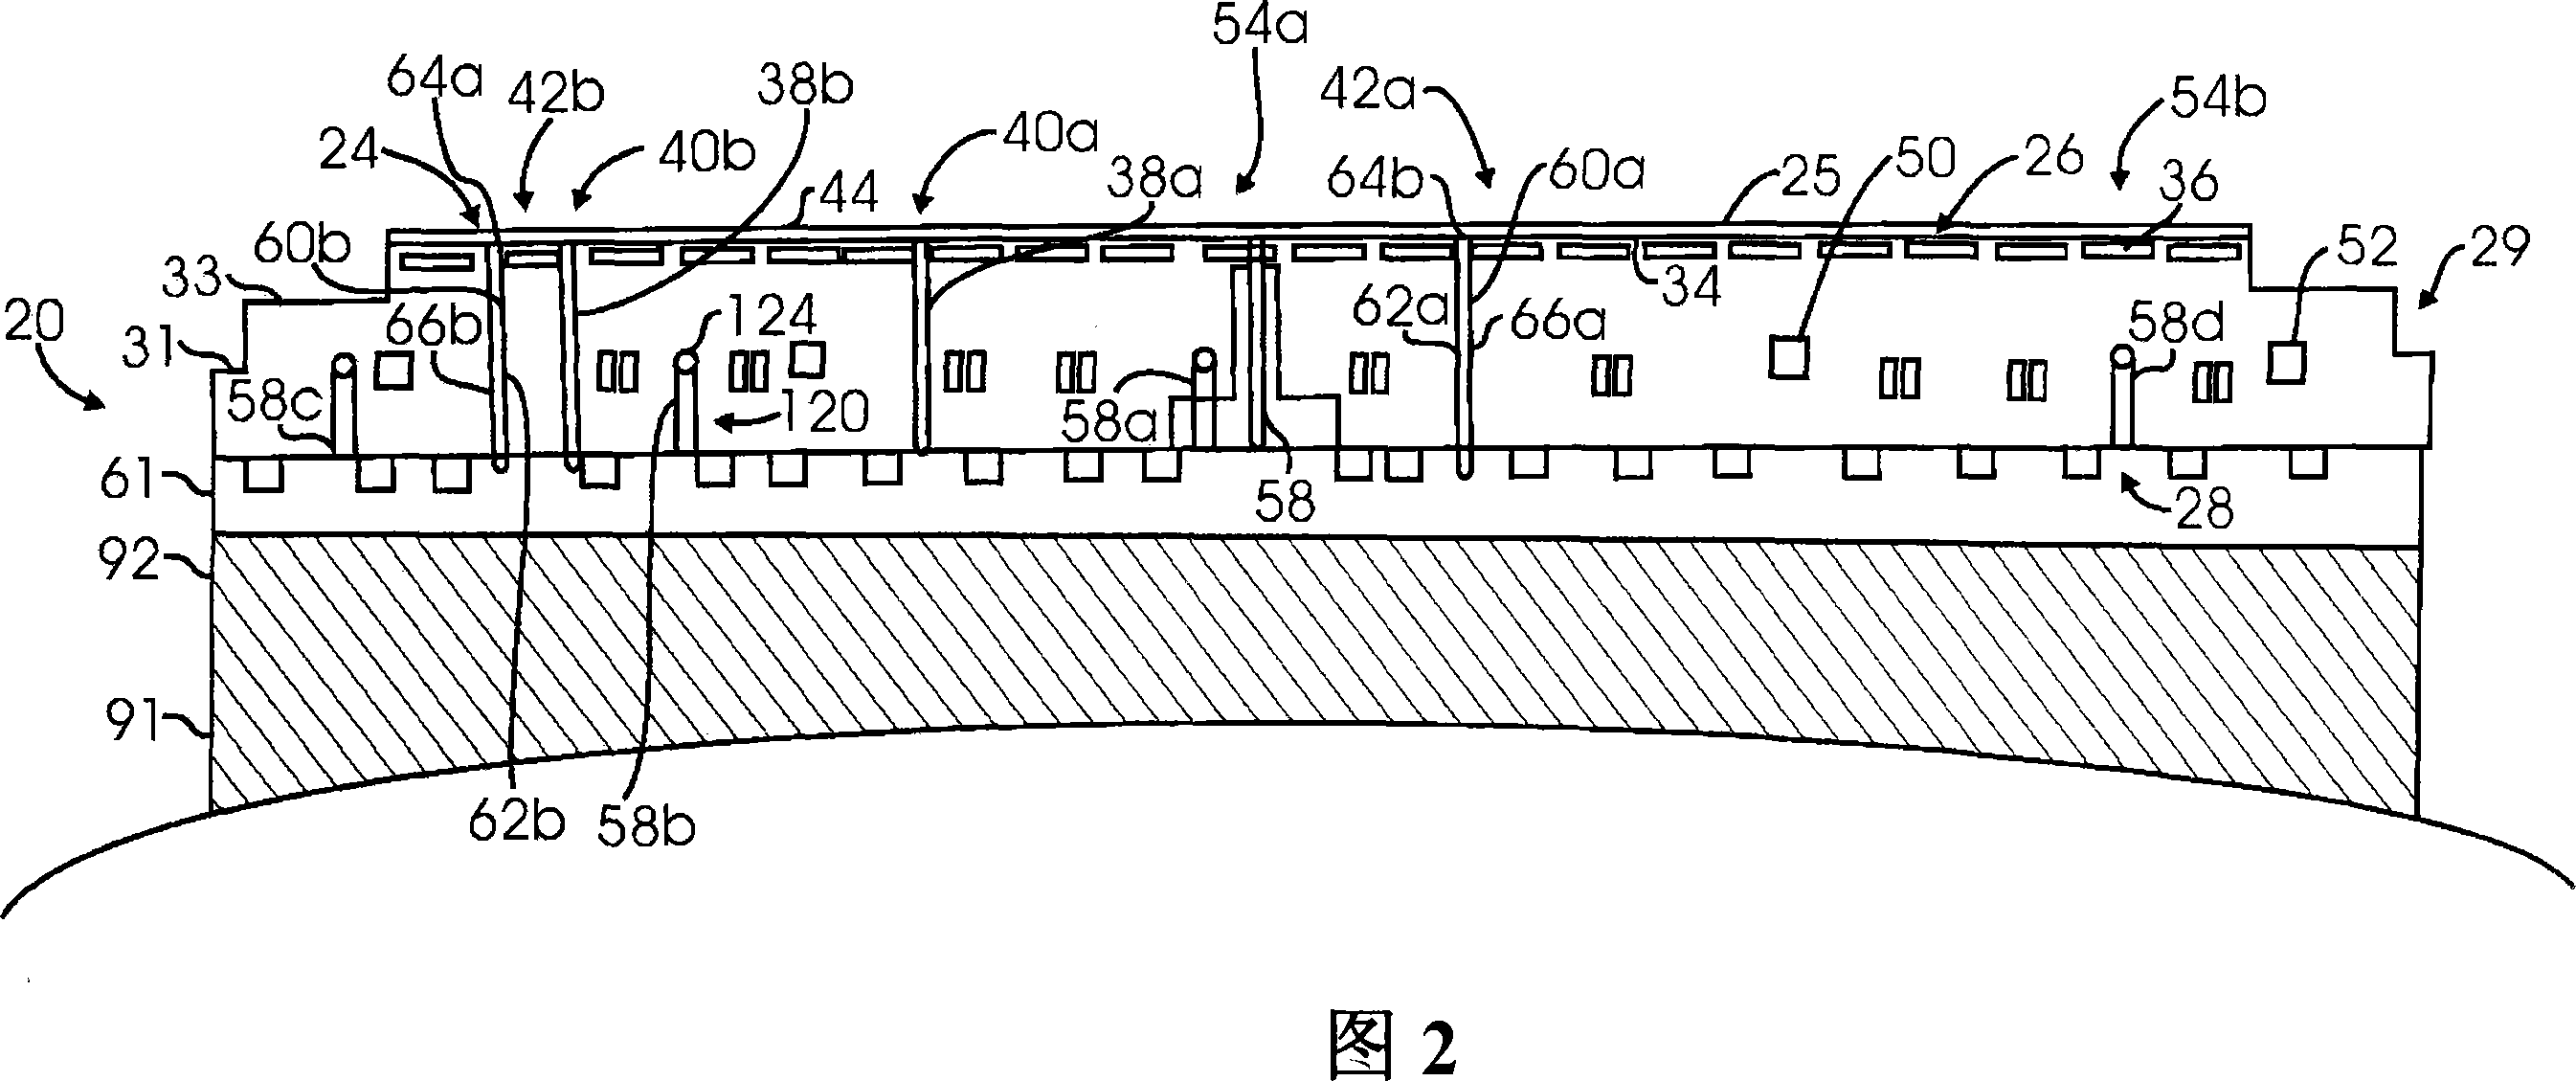 Substrate processing with rapid temperature gradient control